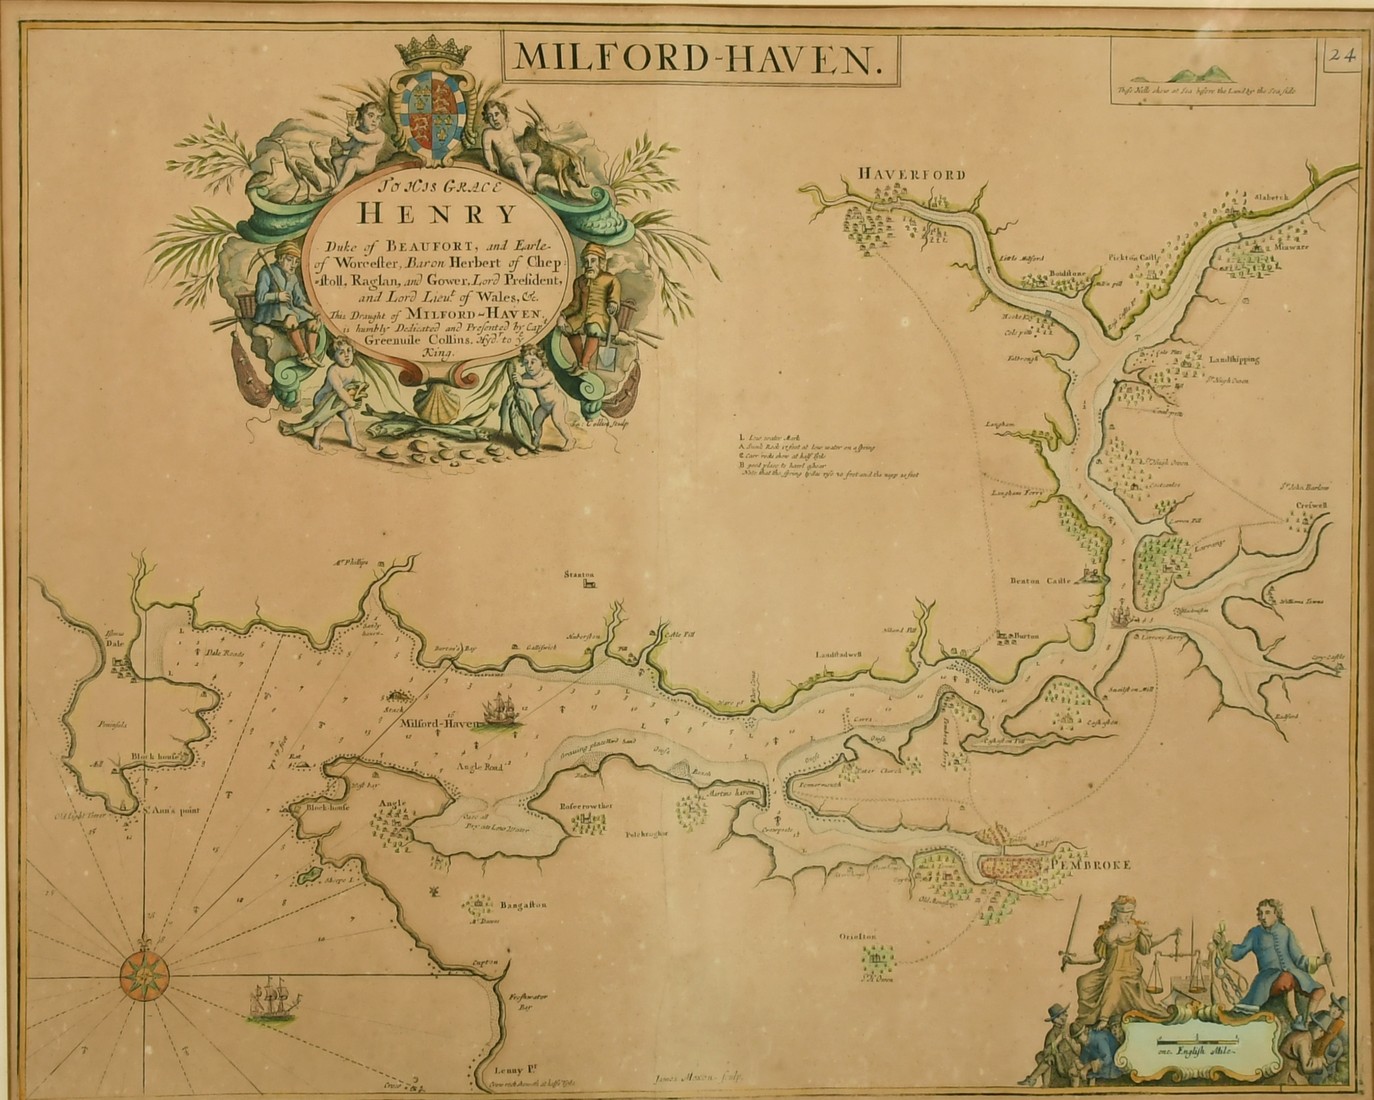 Greenuile Collins, A hand coloured engraved map/chart of Milford Haven, 18" x 22.75".